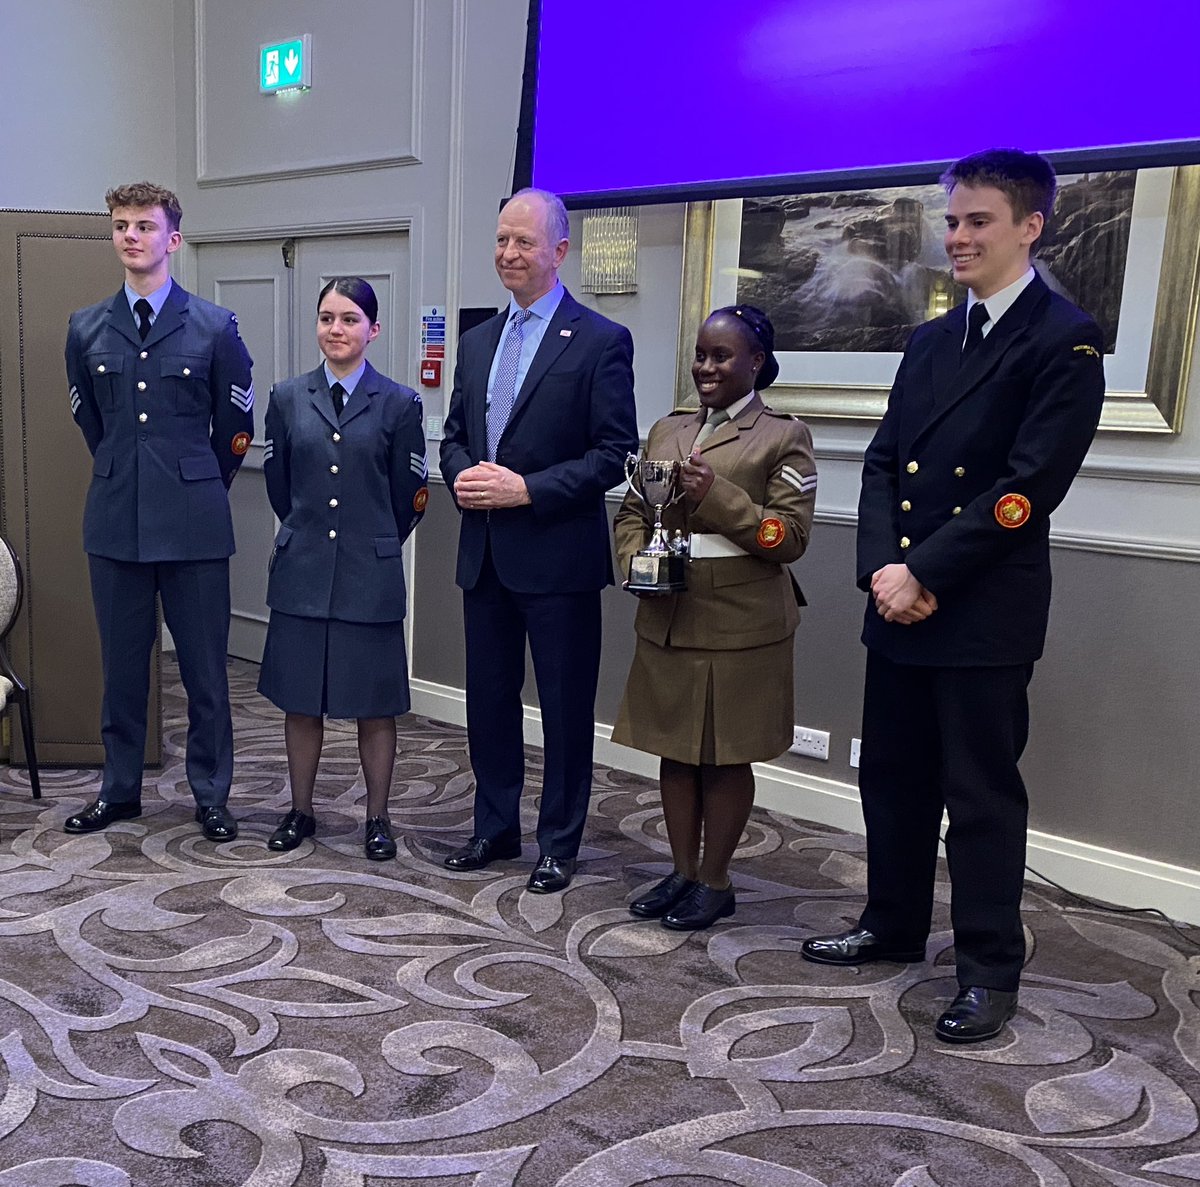 This evening our Lieutenant Governor Cadet, WO1 Thomas gave a presentation to @RotaryDLM, attended by His Excellency. Congratulations to all the LG Cadets, particularly Cpl Jemima from Jersey ACF who secured £1,000 👏 @victoriacollege @jcg_live @CCFcadets